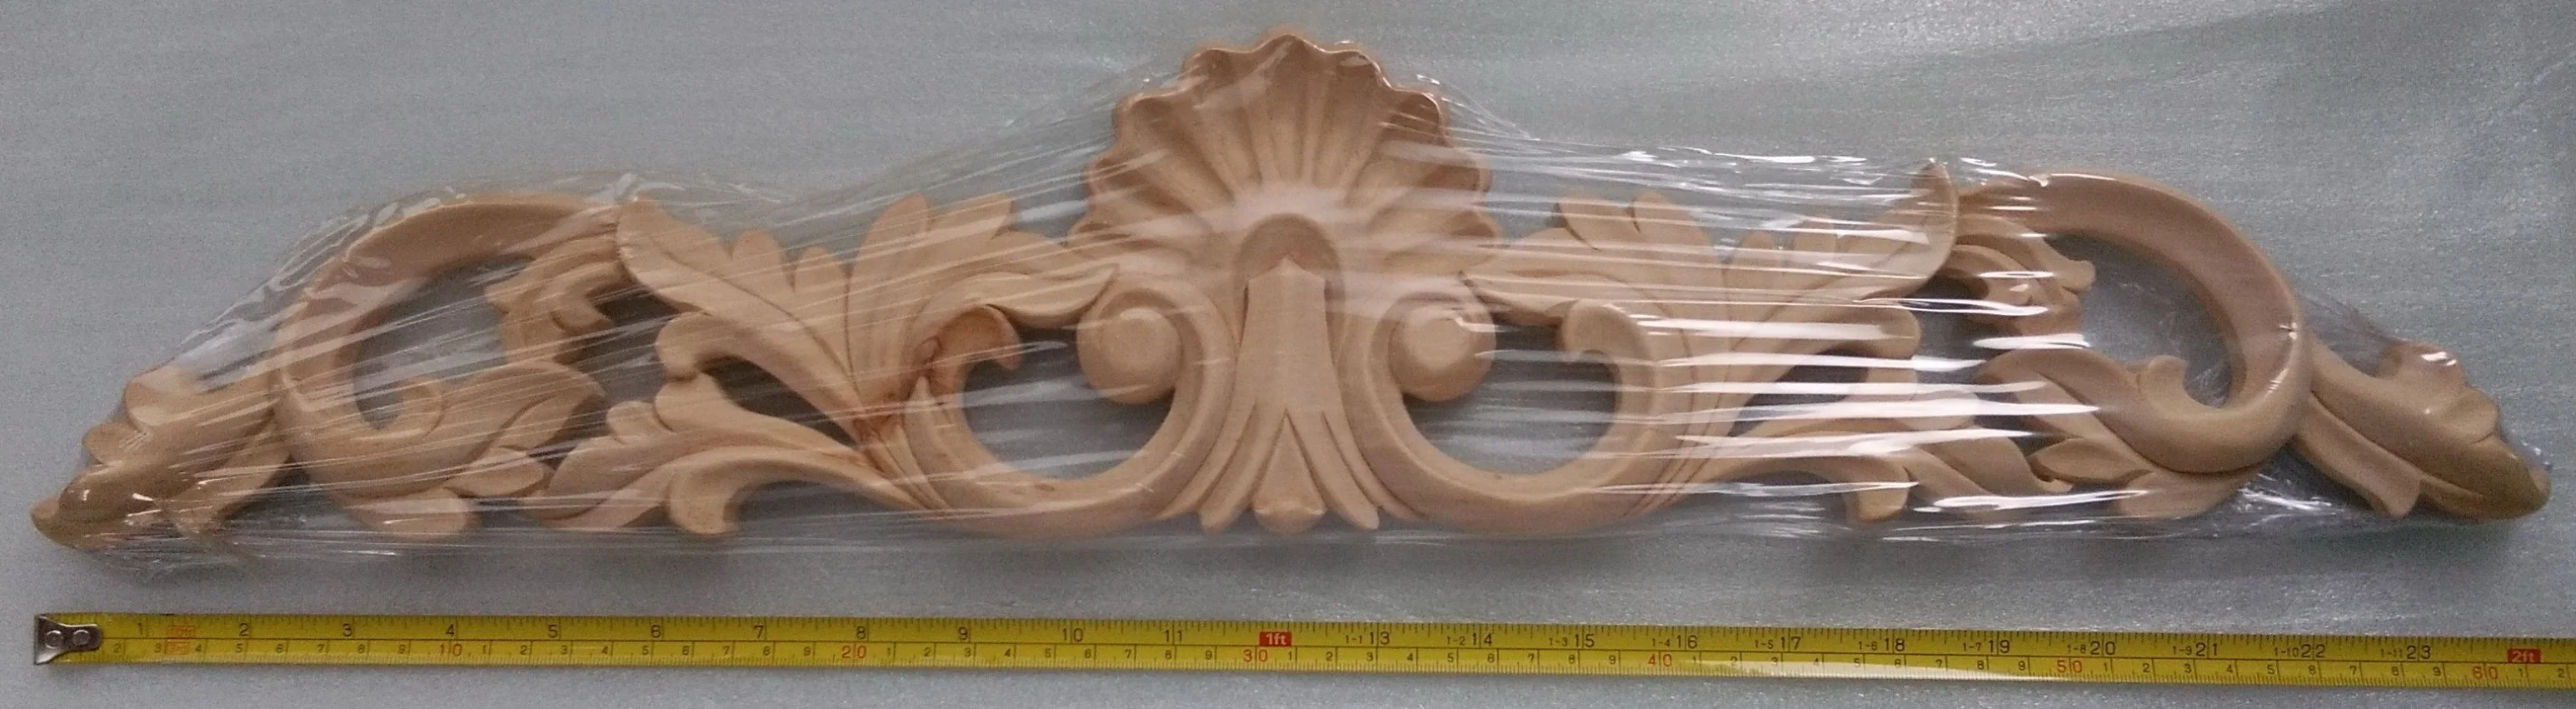 Handcrafted Wood Applique for Interior Decoration